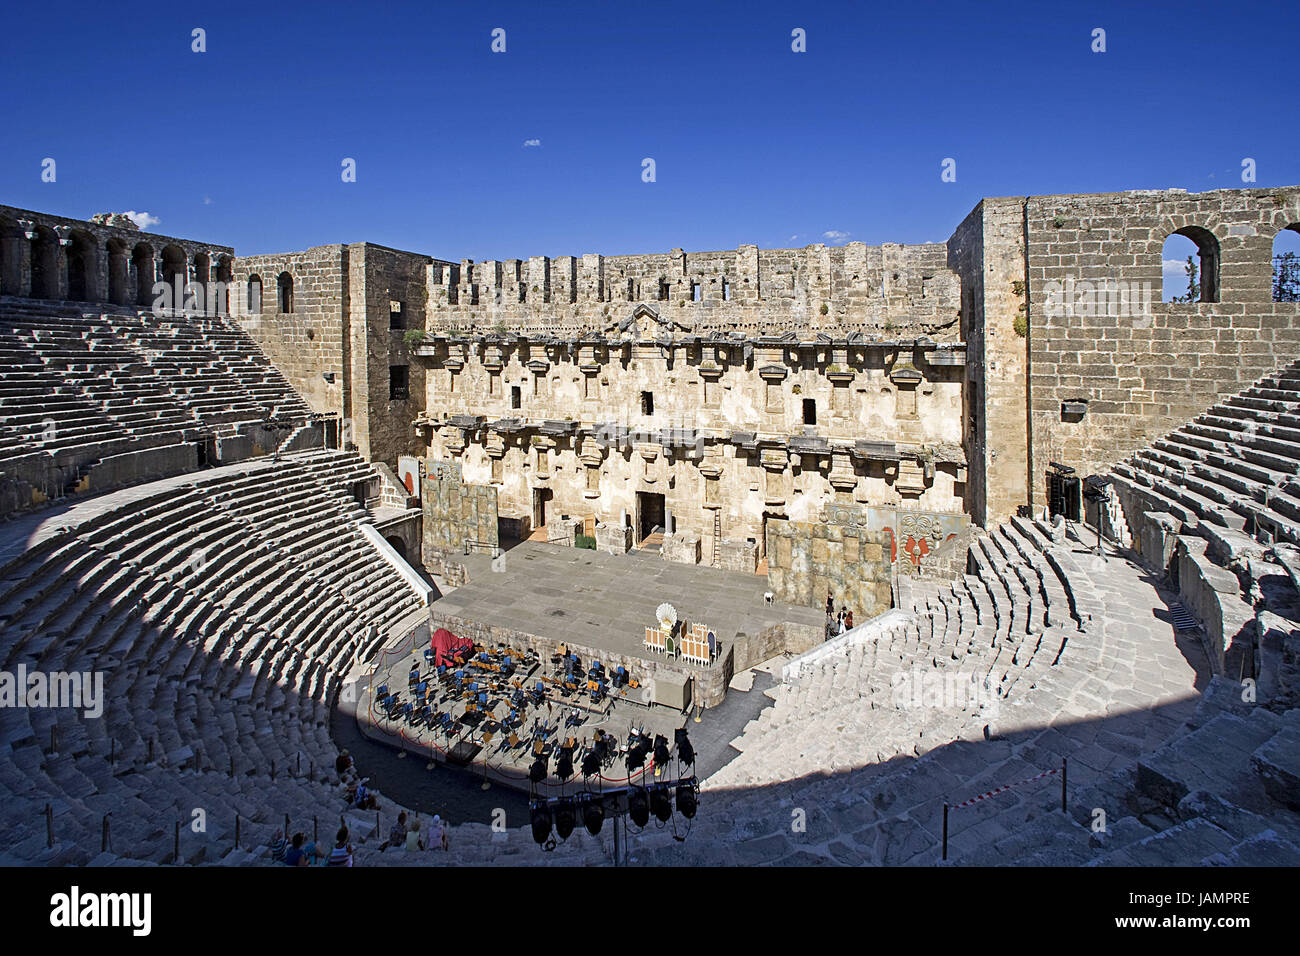 Turkey,Aspendos,amphitheatre,tourist,Mediterranean coast,ruin site,structure,theatre,remains,historically,old,antique,architecture,culture,place of interest,person,visitor,sightseeing,destination,tourism,film set,stage,orchestra,spectator's stand,ranks, Stock Photo